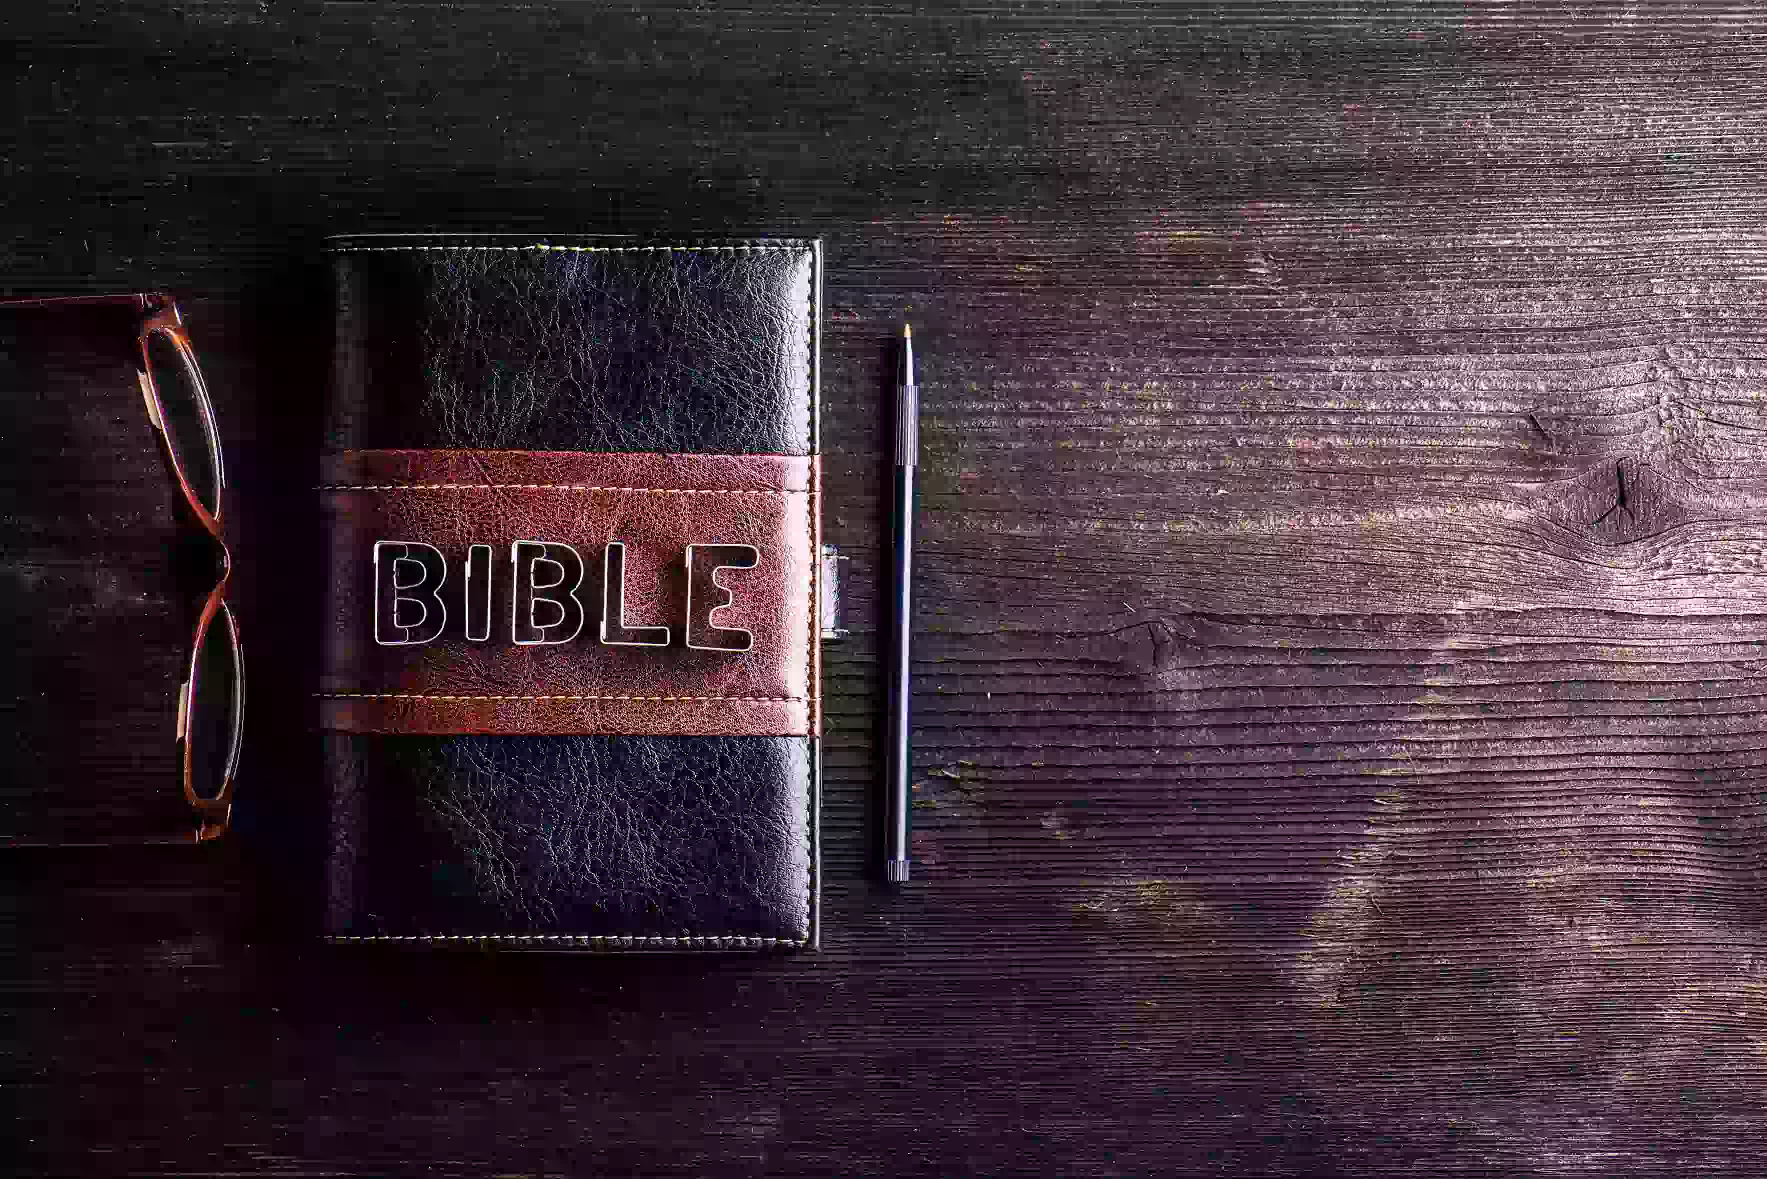 What Does The Bible Teach: an insightful list of lessons